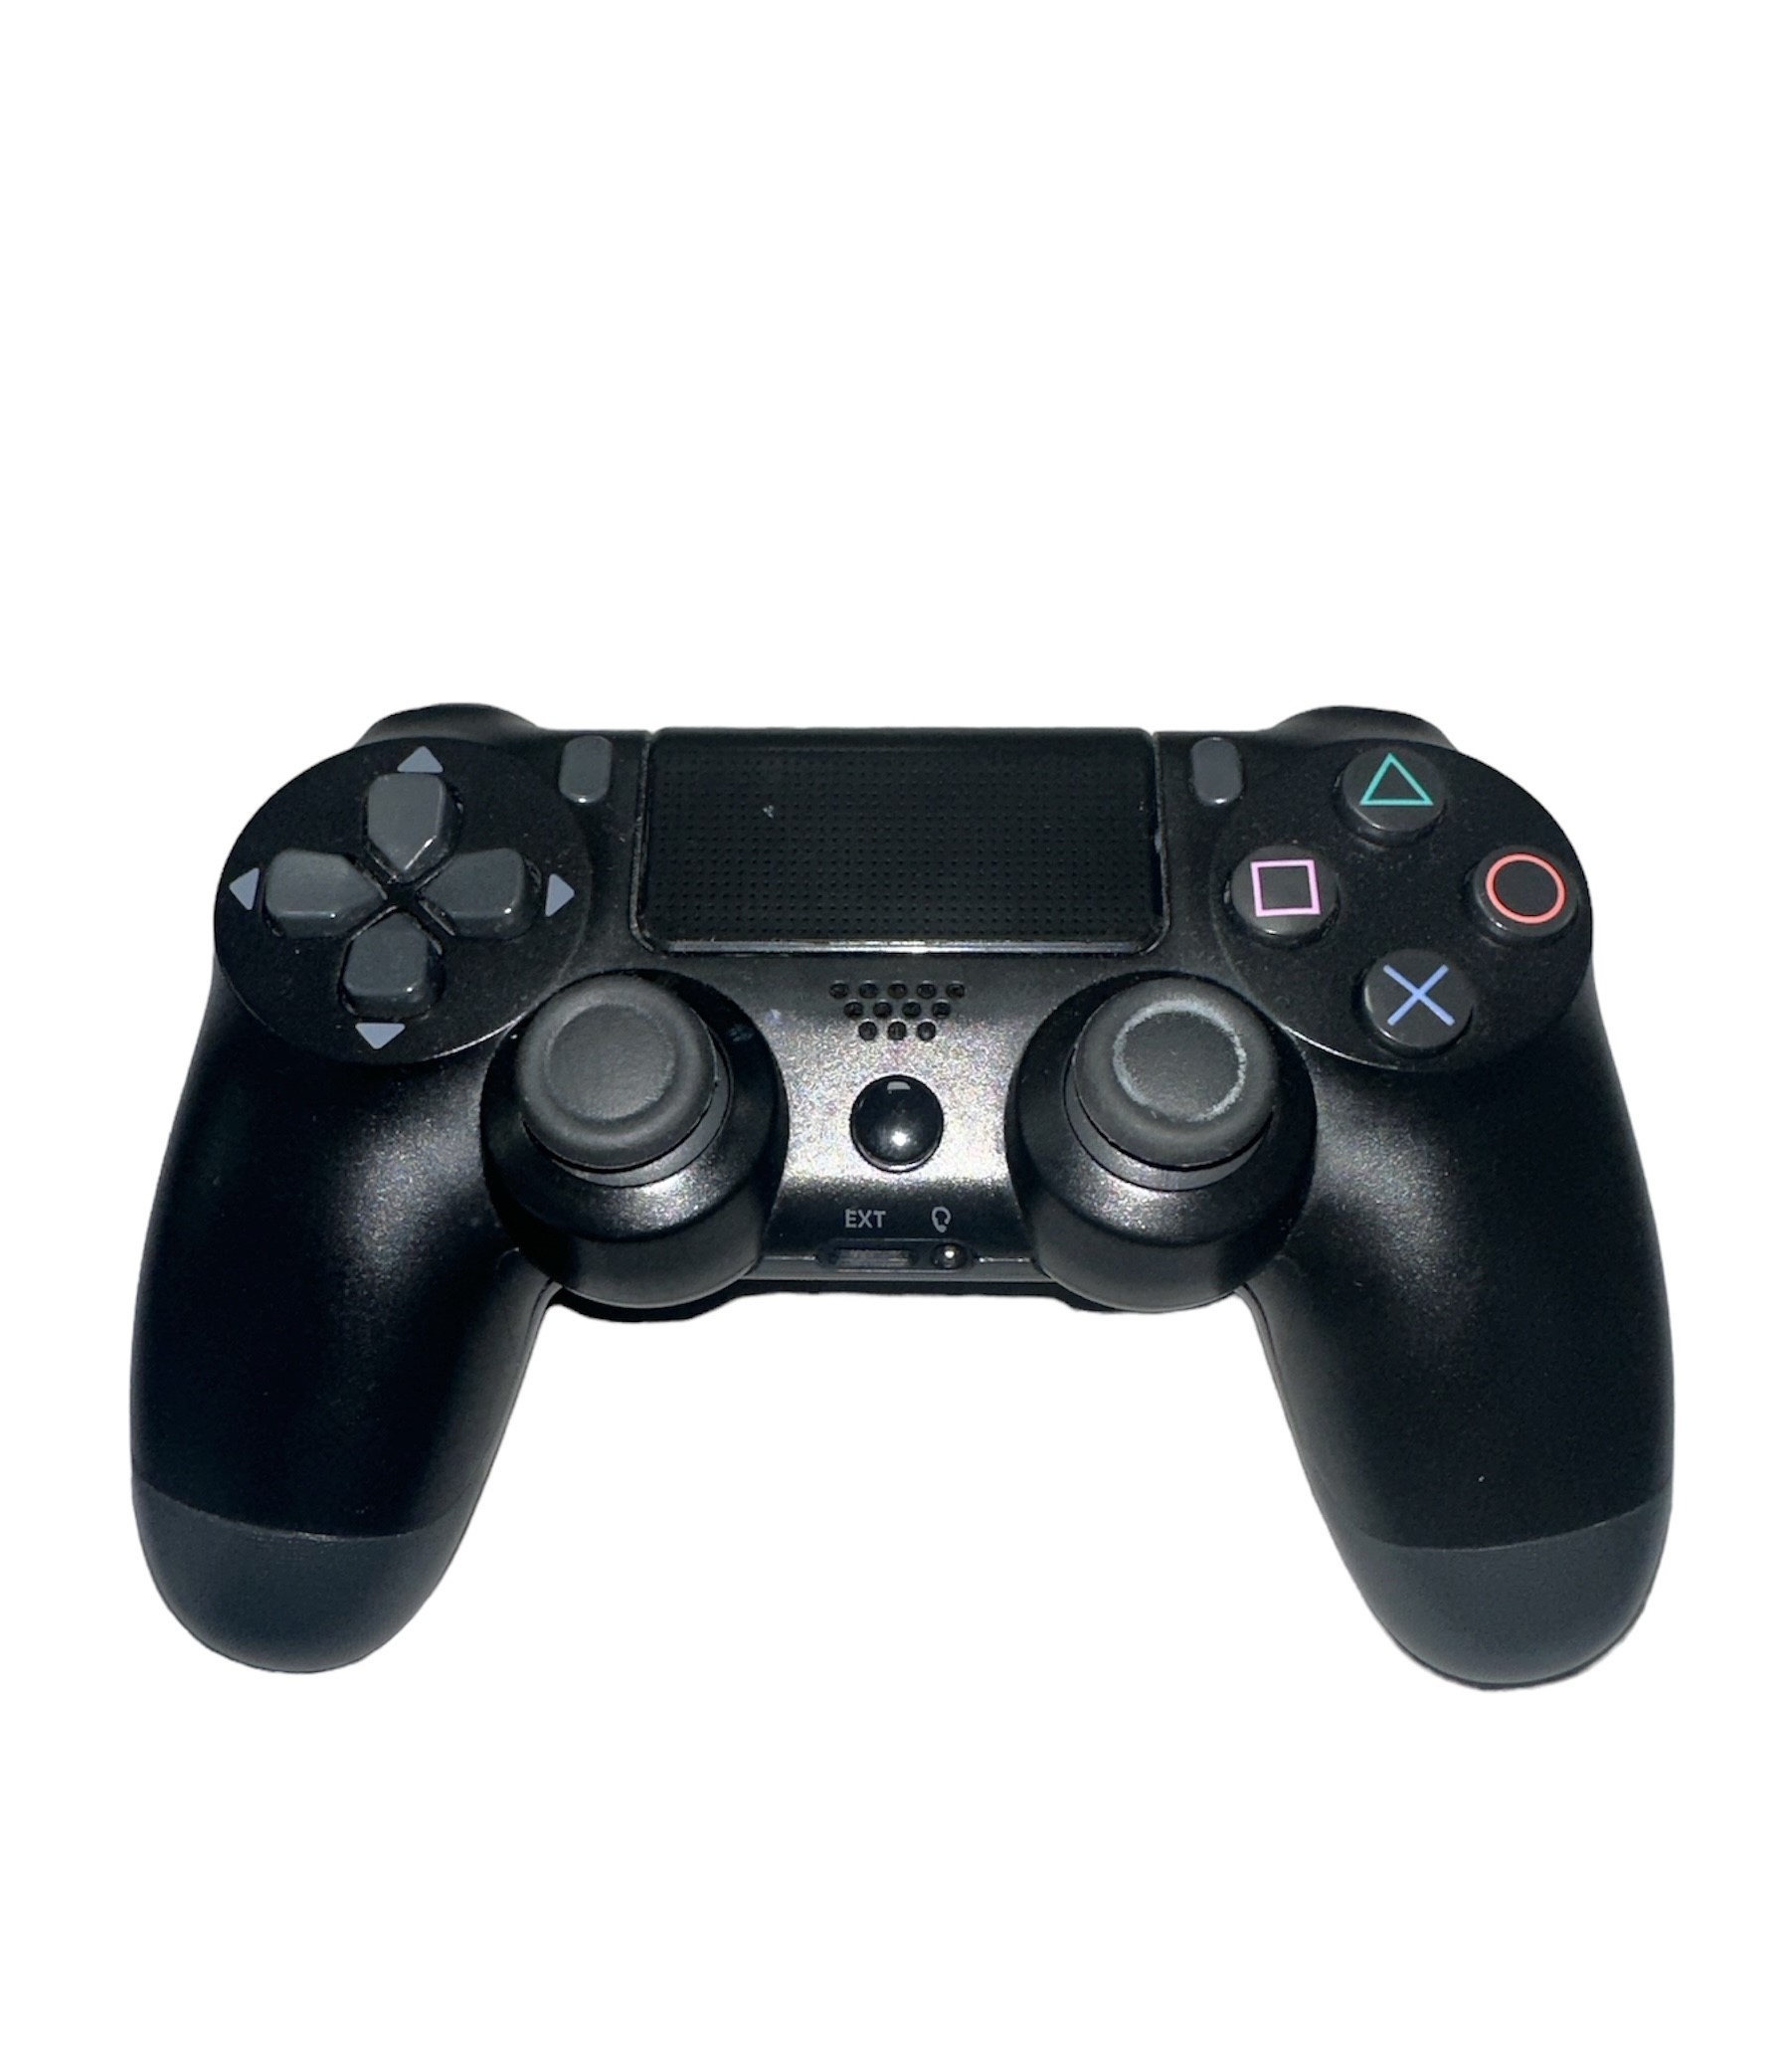 Playstation 4 Third Party Controller - Black - Unboxed